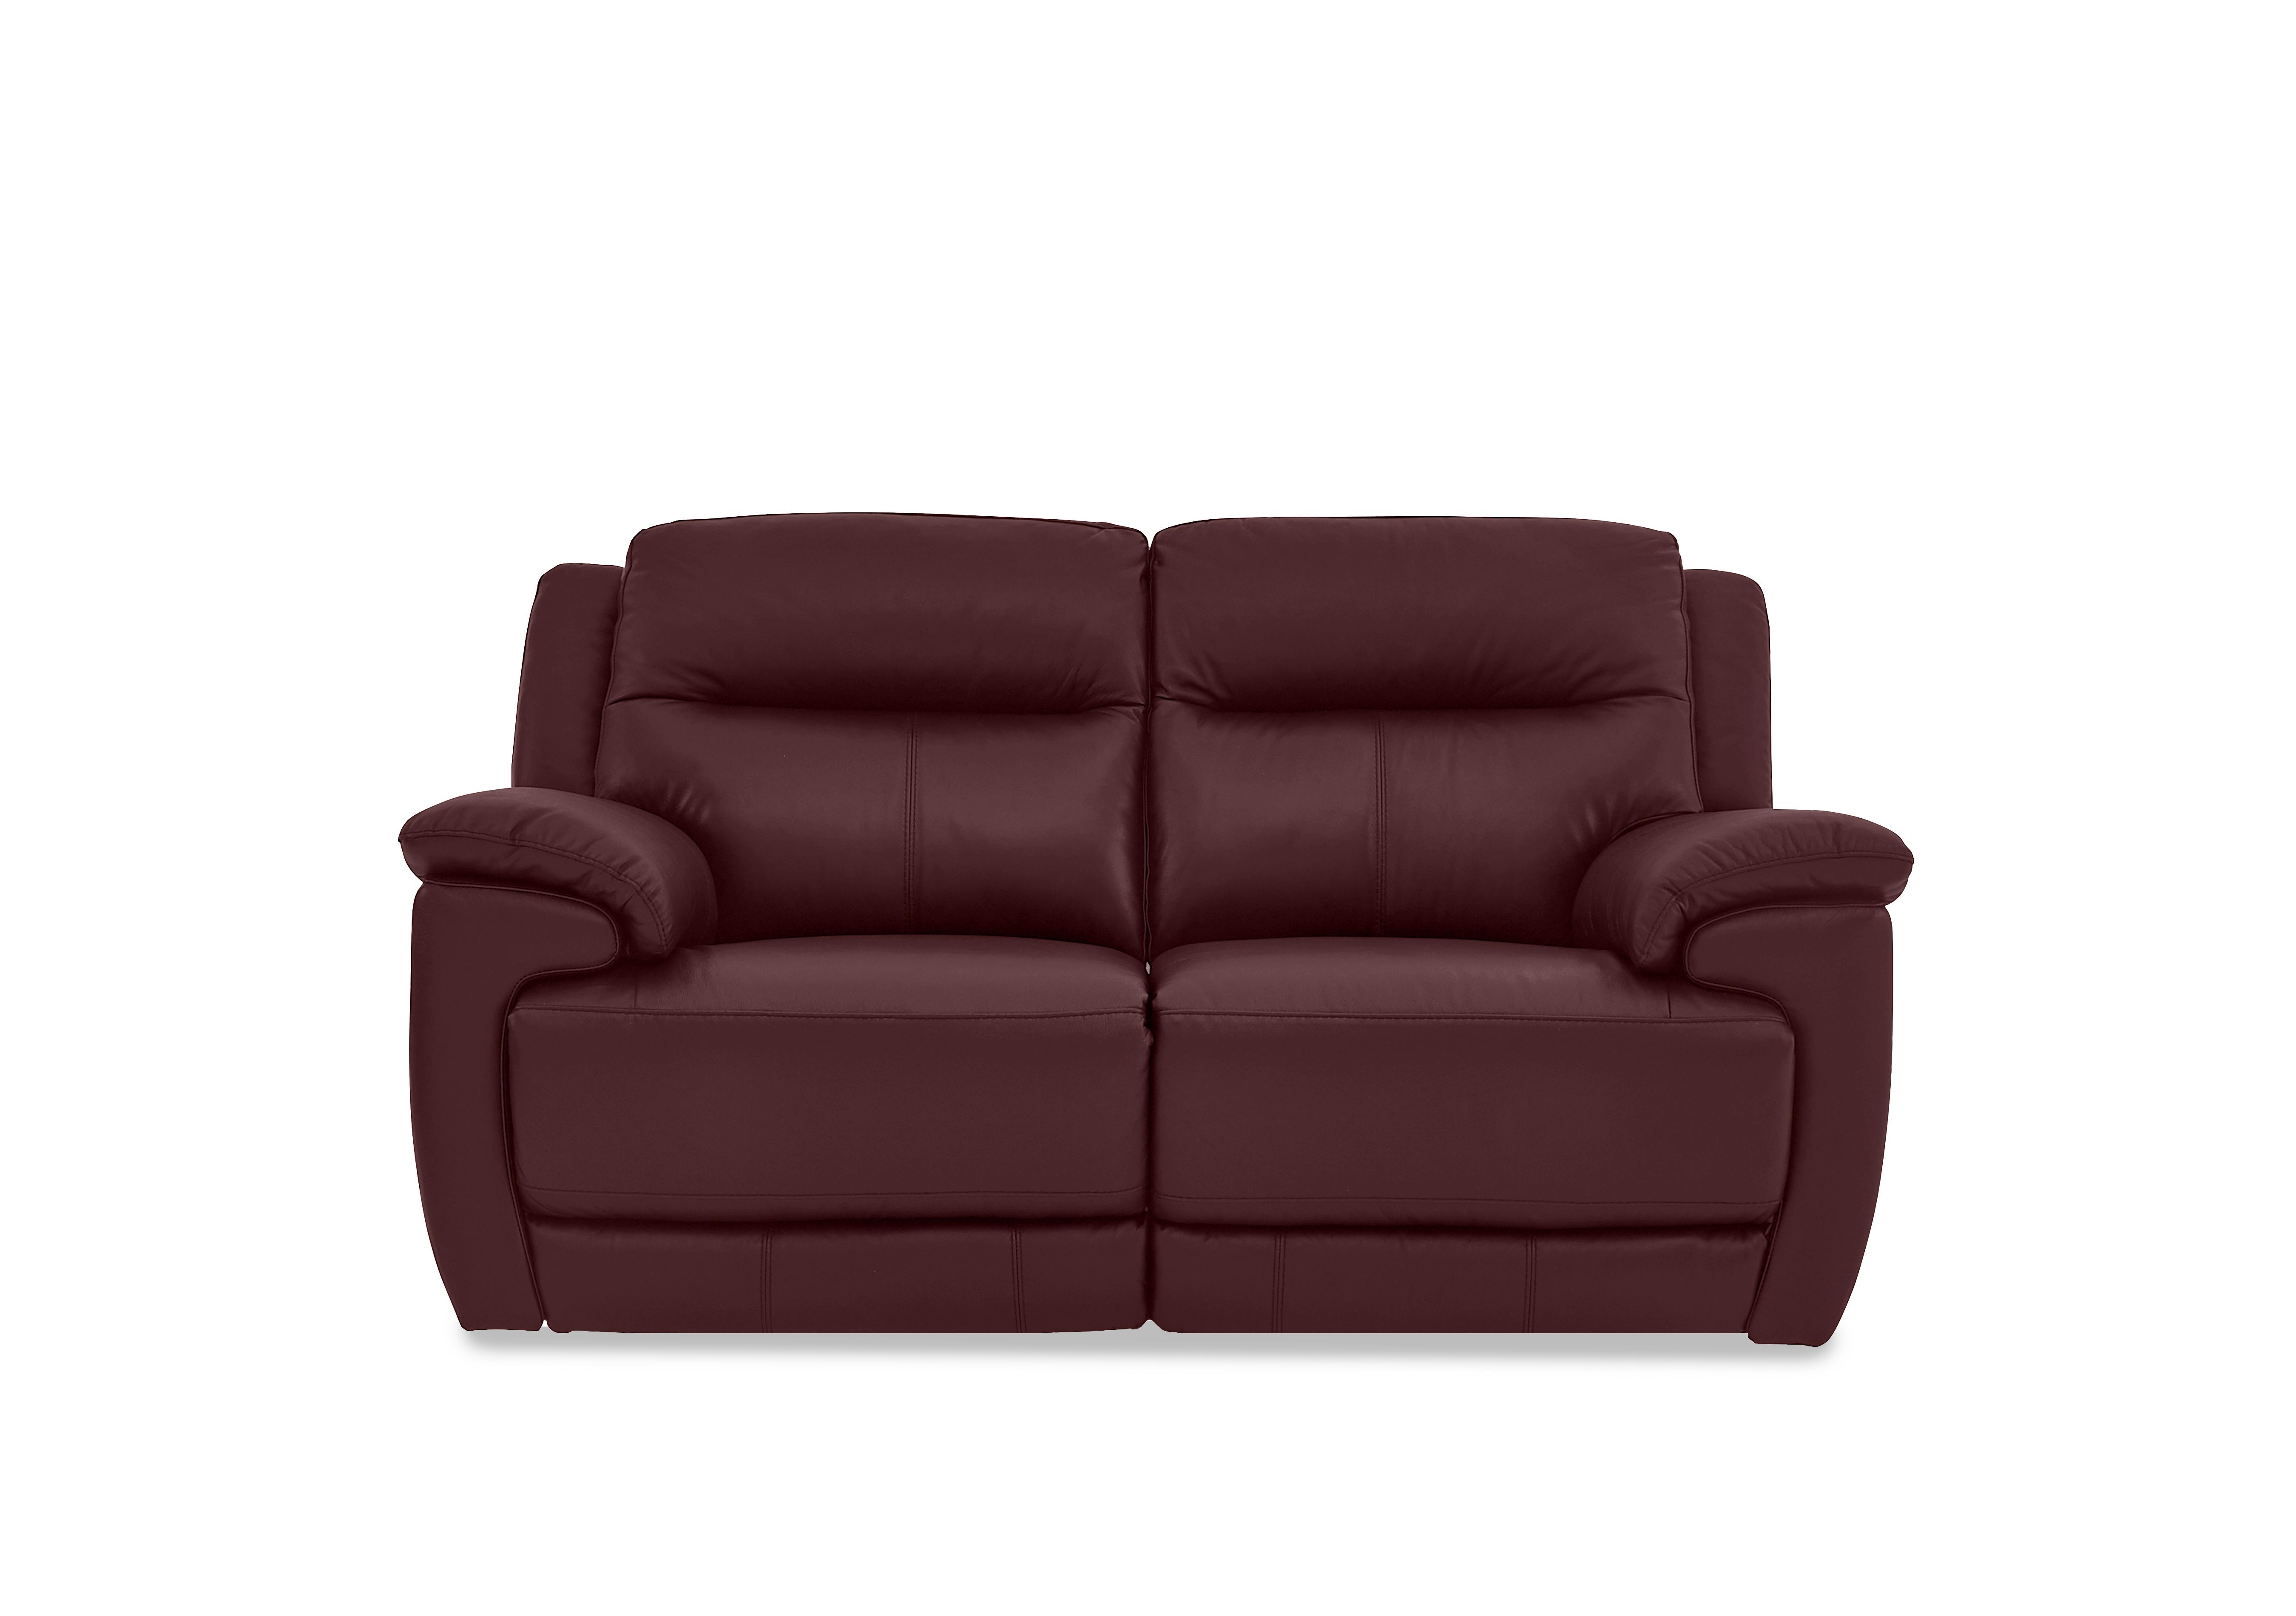 Touch 2 Seater Leather Sofa in Bv-035c Deep Red on Furniture Village